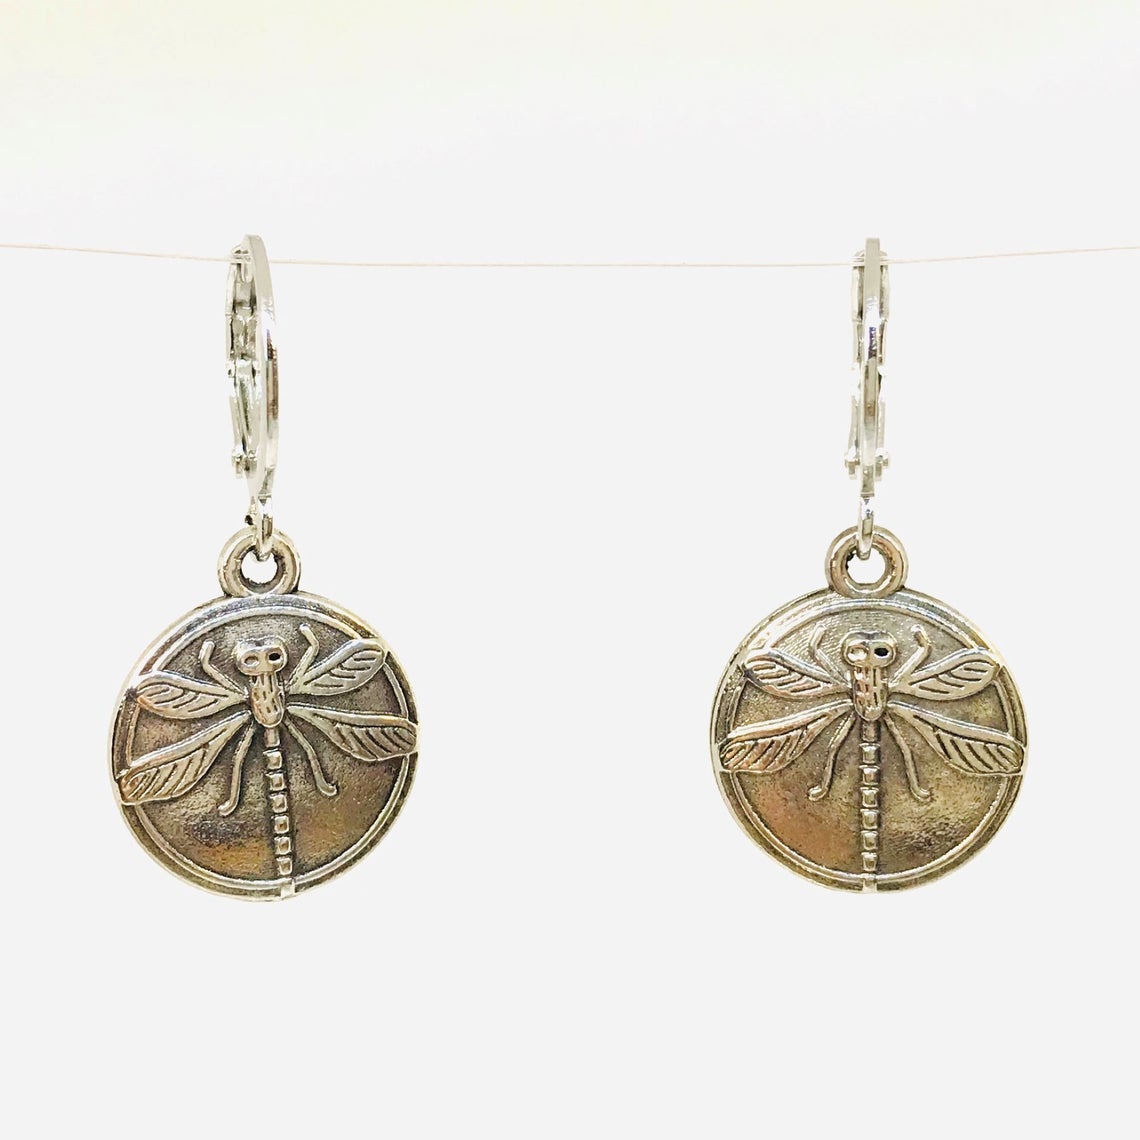 Vintage Dragonfly Coin Earrings